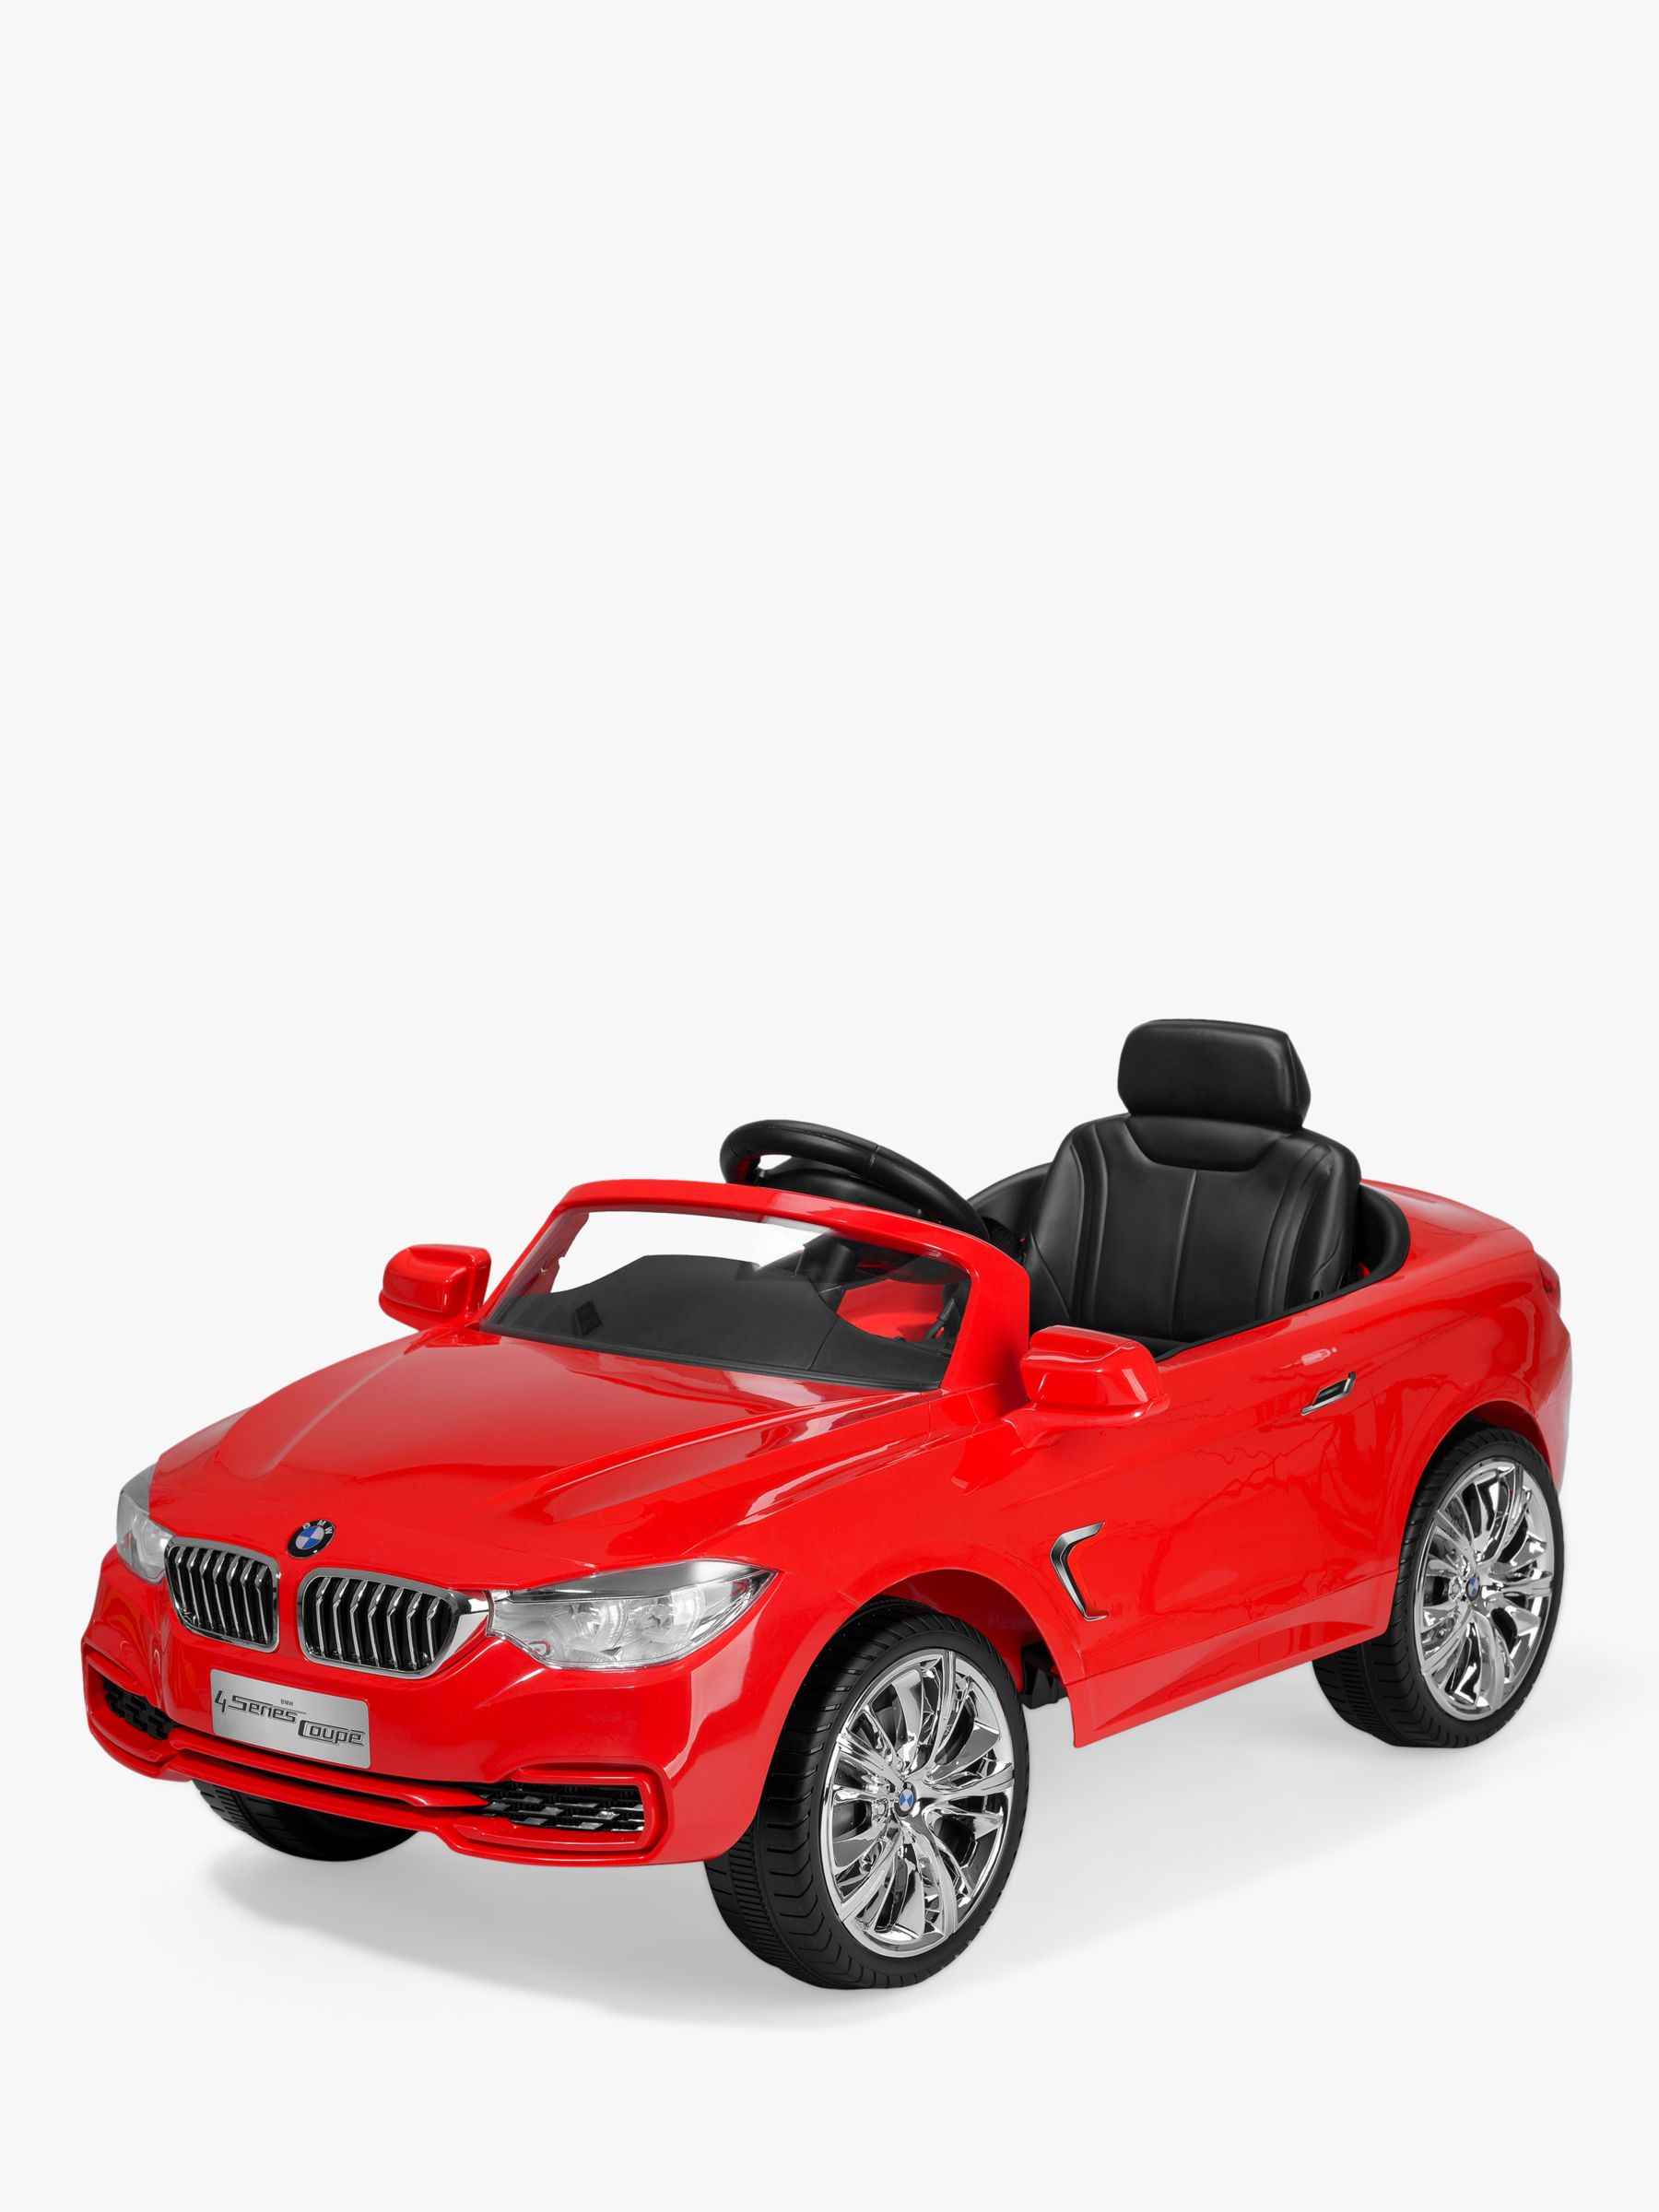 BMW 4 Series Electric Ride-On Toy Car 